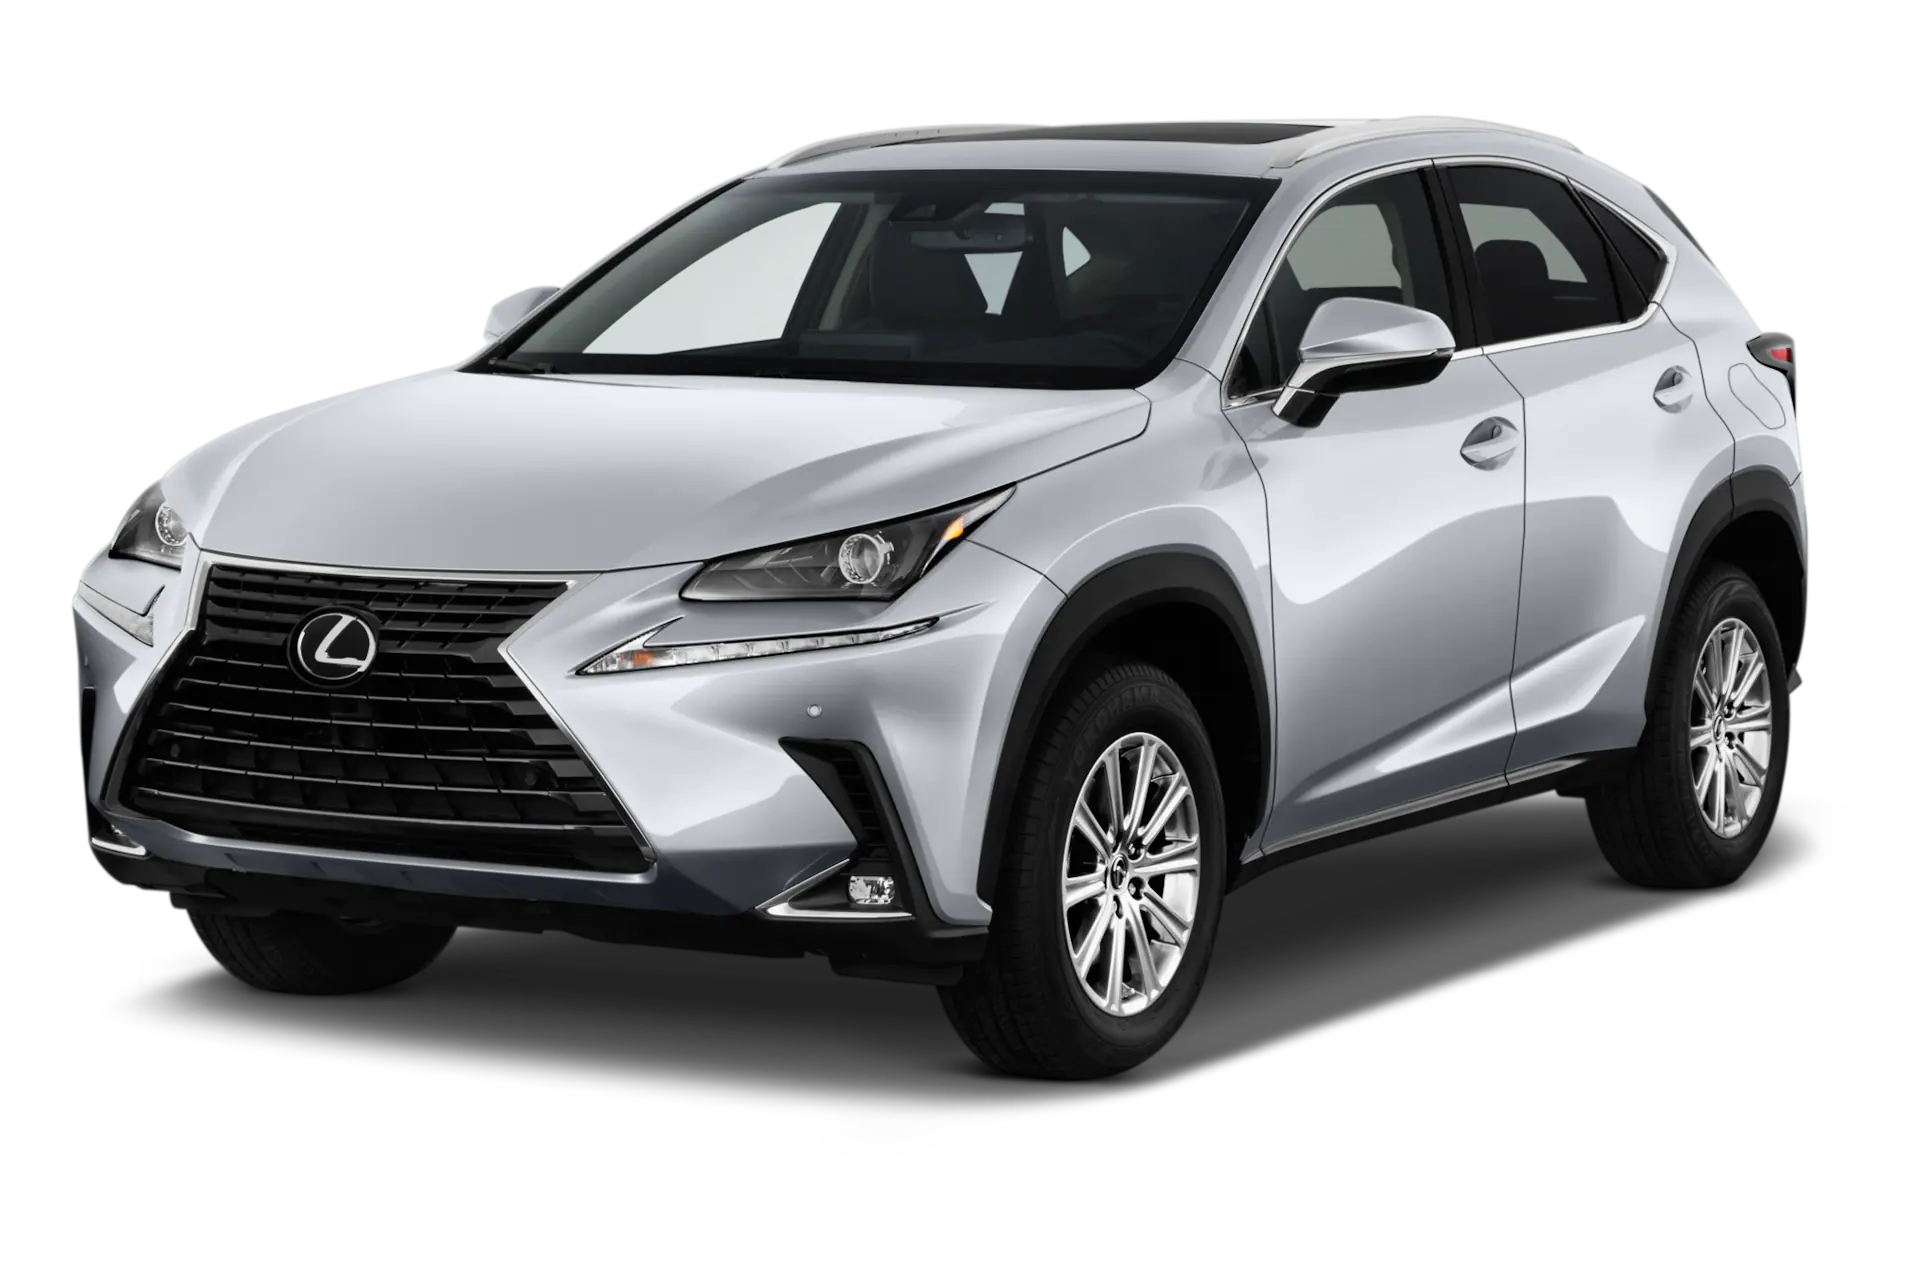 2018 Lexus Nx300 oem parts and accessories on sale